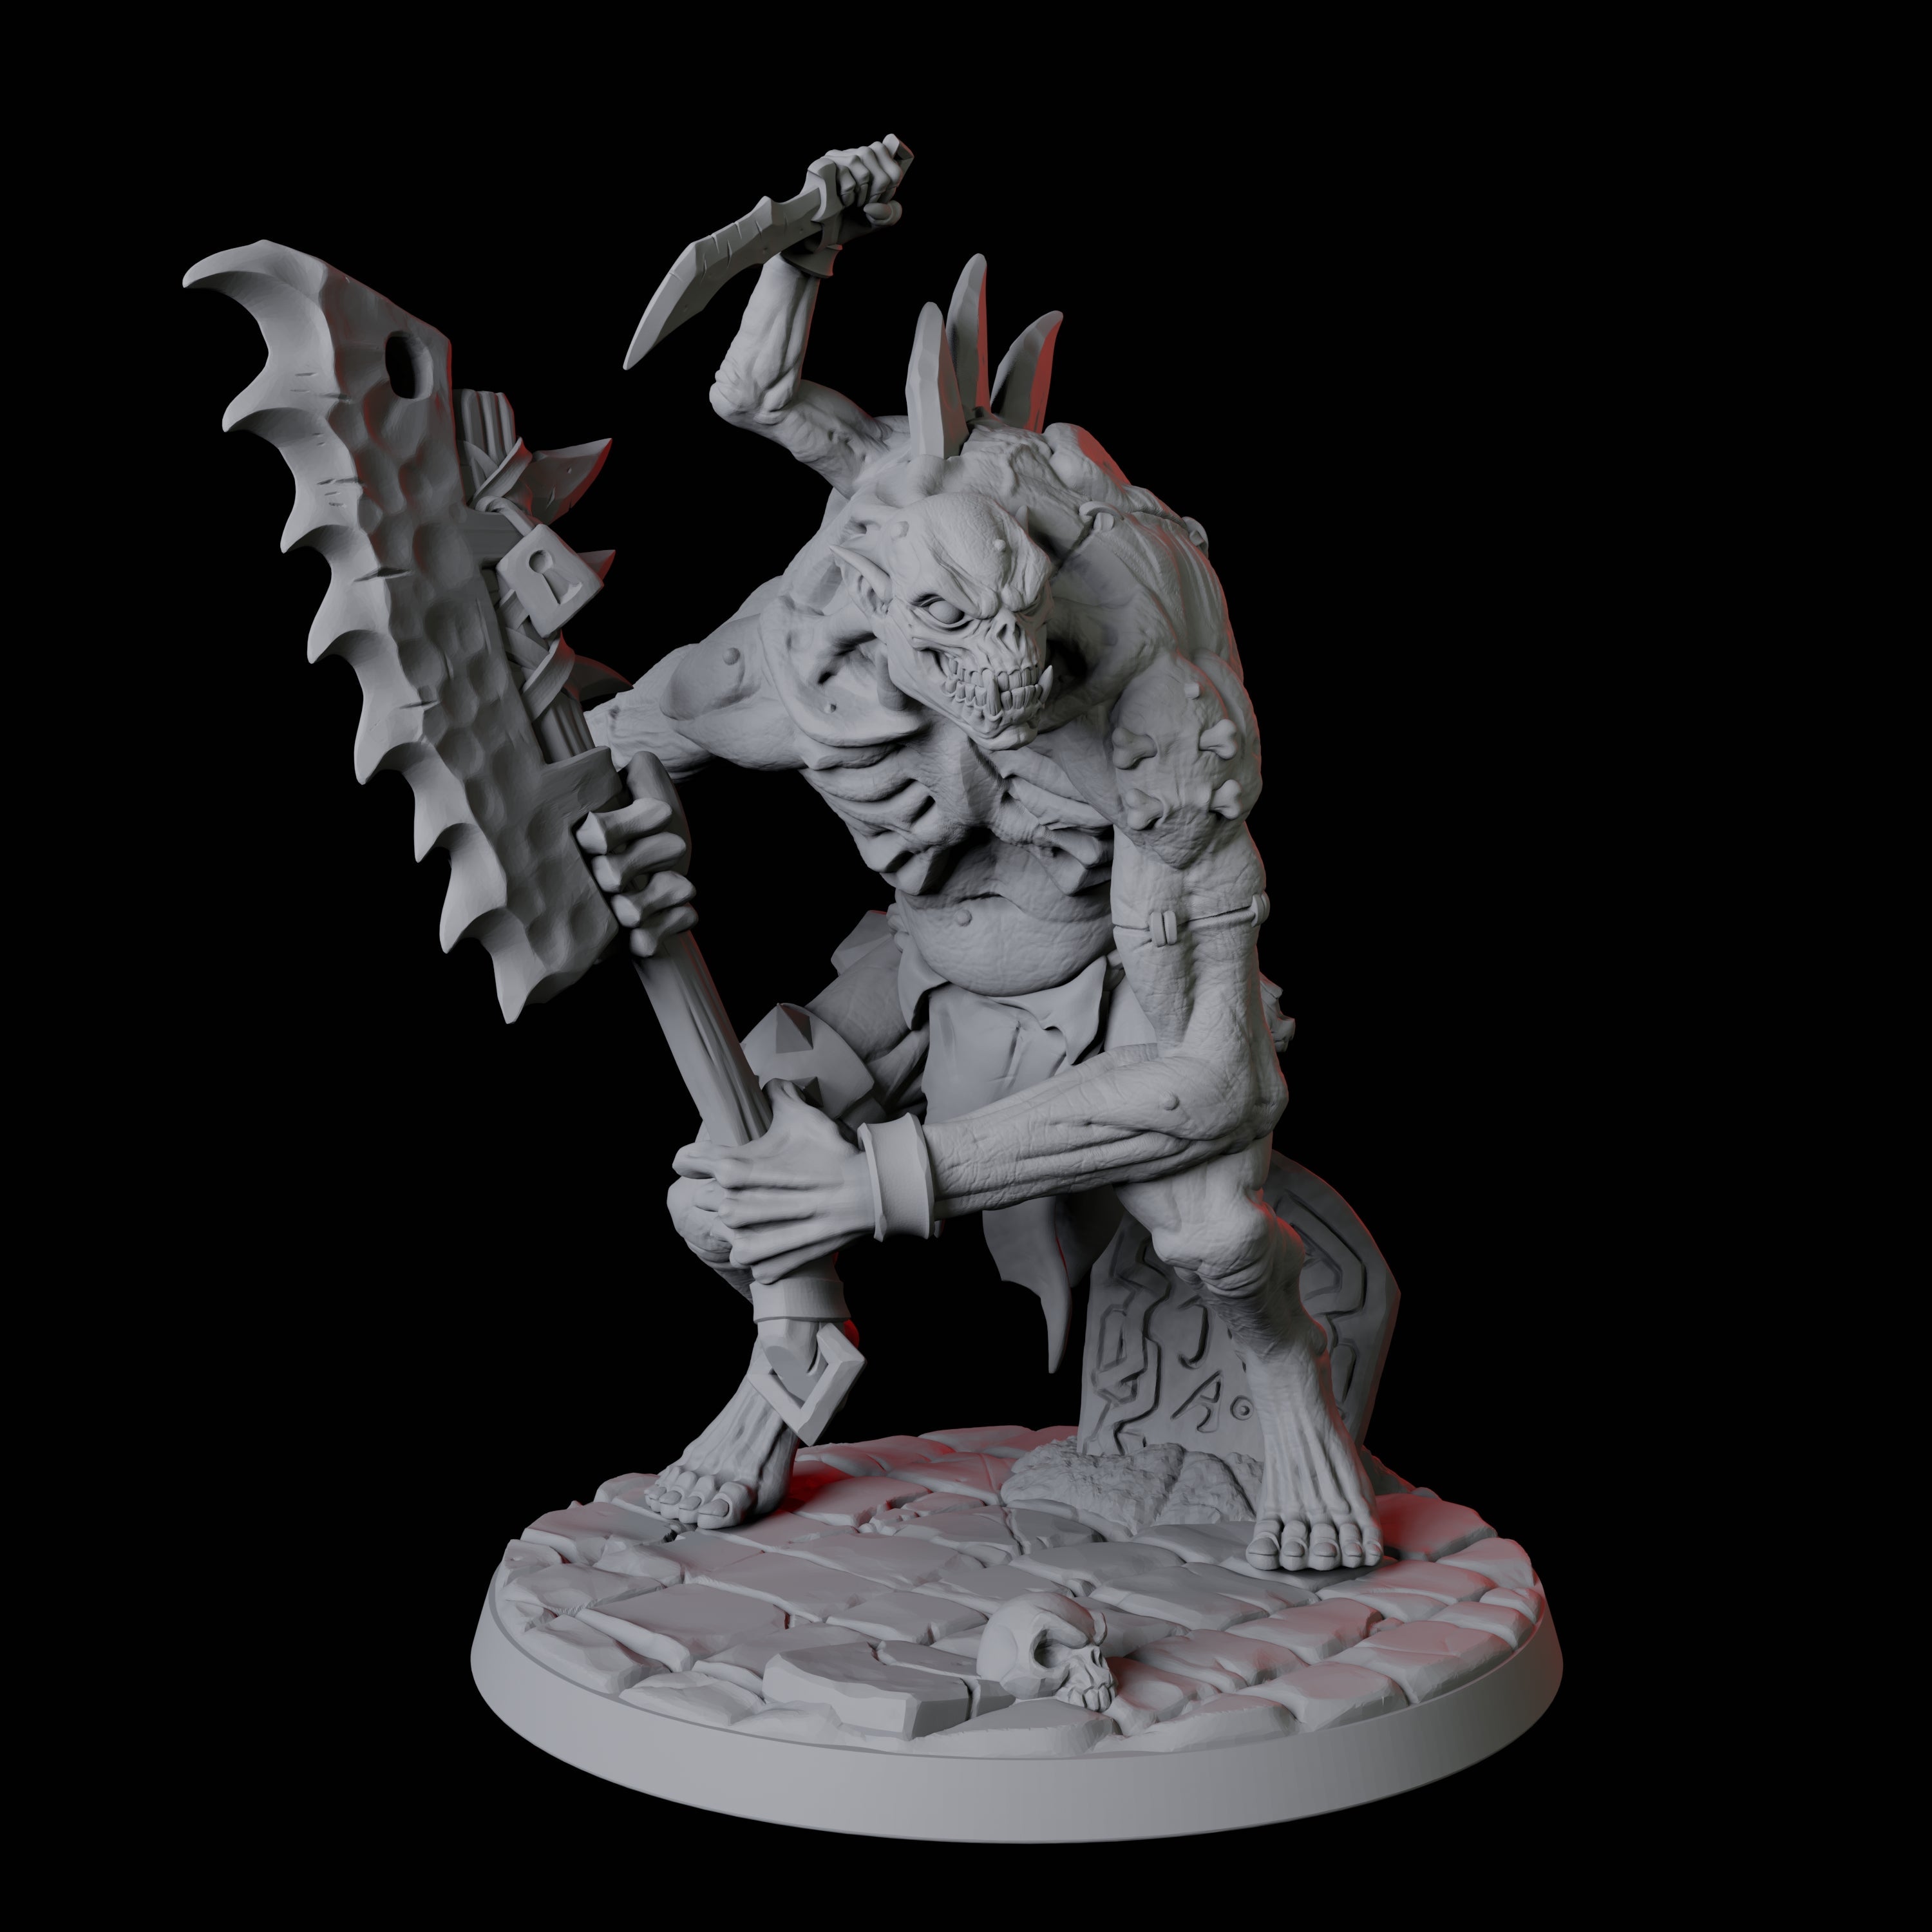 Roaming Ghast D Miniature for Dungeons and Dragons, Pathfinder or other TTRPGs